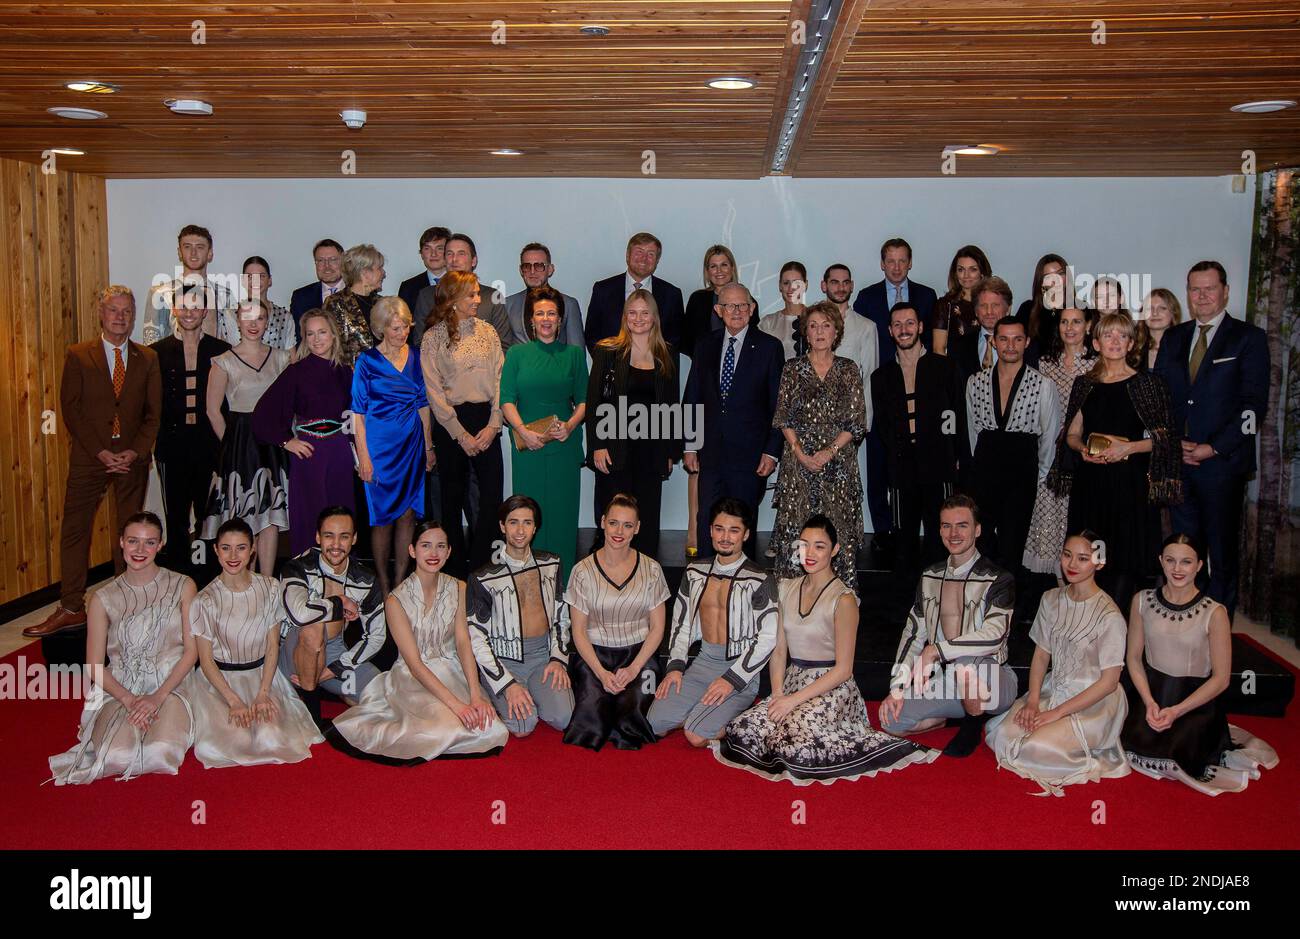 Princess Margriet of The Netherlands and Prof. mr. Pieter van Vollenhoven Prince Maurits and Princess Marilène and Lucas Prince Bernhard, Princess Annette and Isabella Prince Pieter-Christiaan and Princess Anita and Emma van Vollenhoven Prince Floris and Princess Aimée, Magali and Eliane Prince Constantijn and Princess Laurentien of The Netherlands King Willem-Alexander and Queen Maxima of The Netherlands Princess Irene van Lippe Biesterfeld and Princess Margarita de Bourbon de Parme and the dancers at Theater Orpheus in Apeldoorn, on February 15, 2023, after attended the performance Carmen.ma Stock Photo